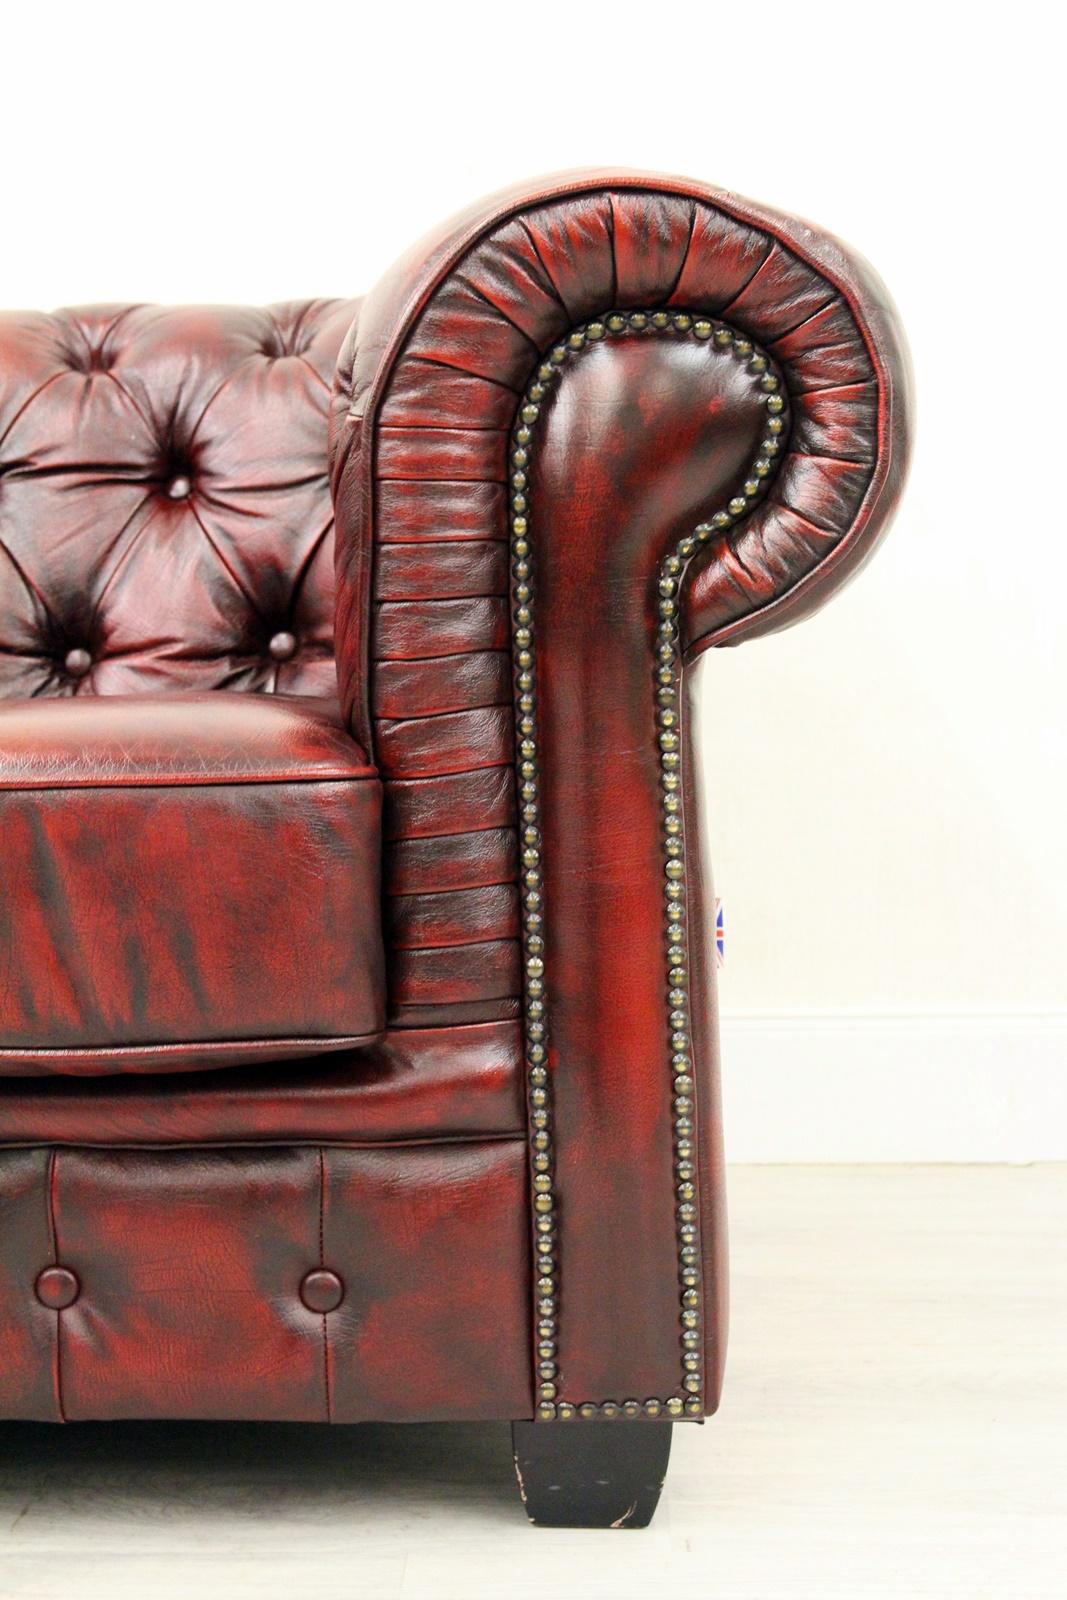 old vintage couch